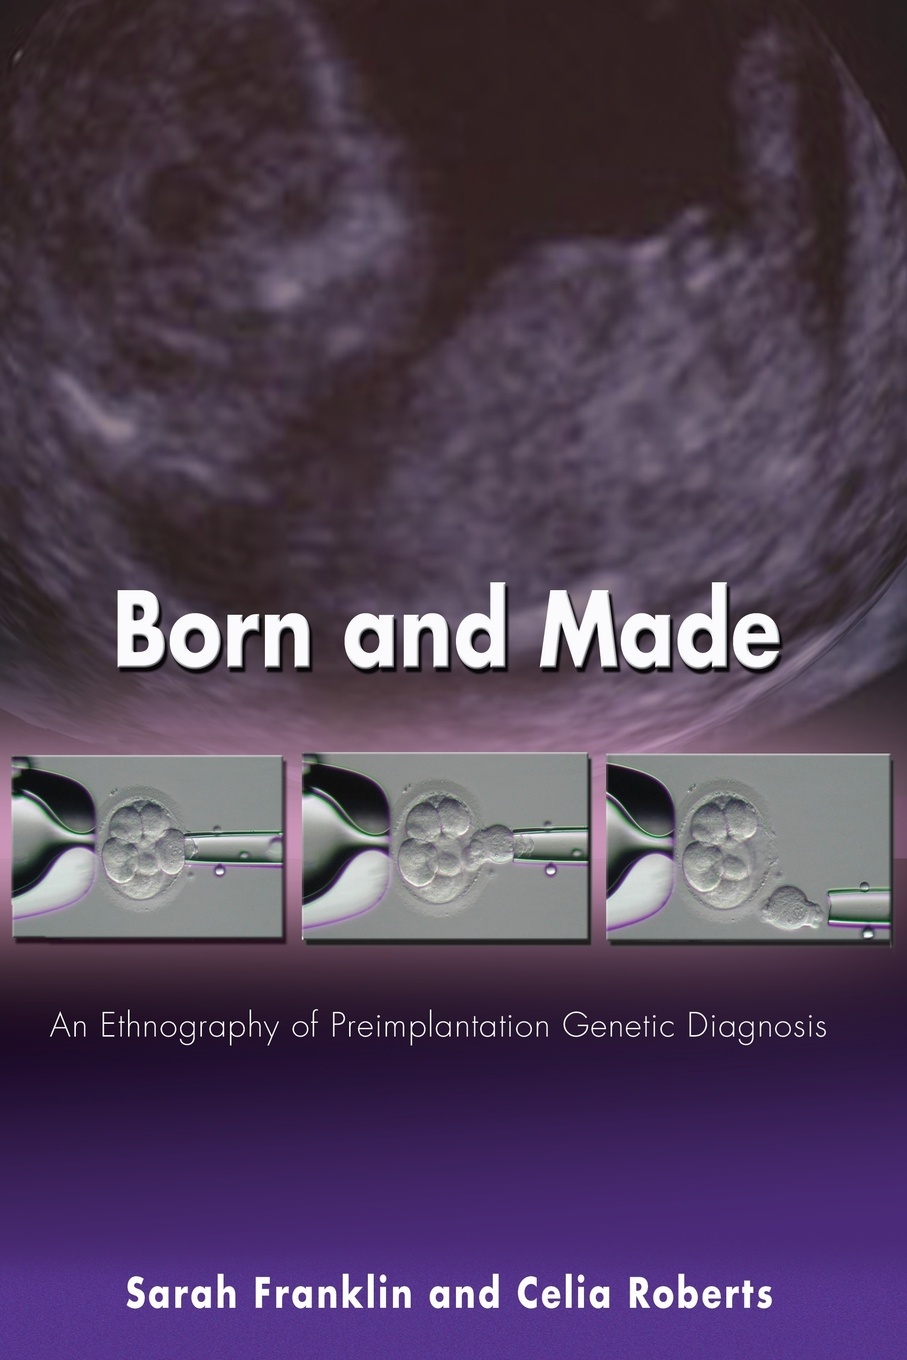 Born and Made. An Ethnography of Preimplantation Genetic Diagnosis